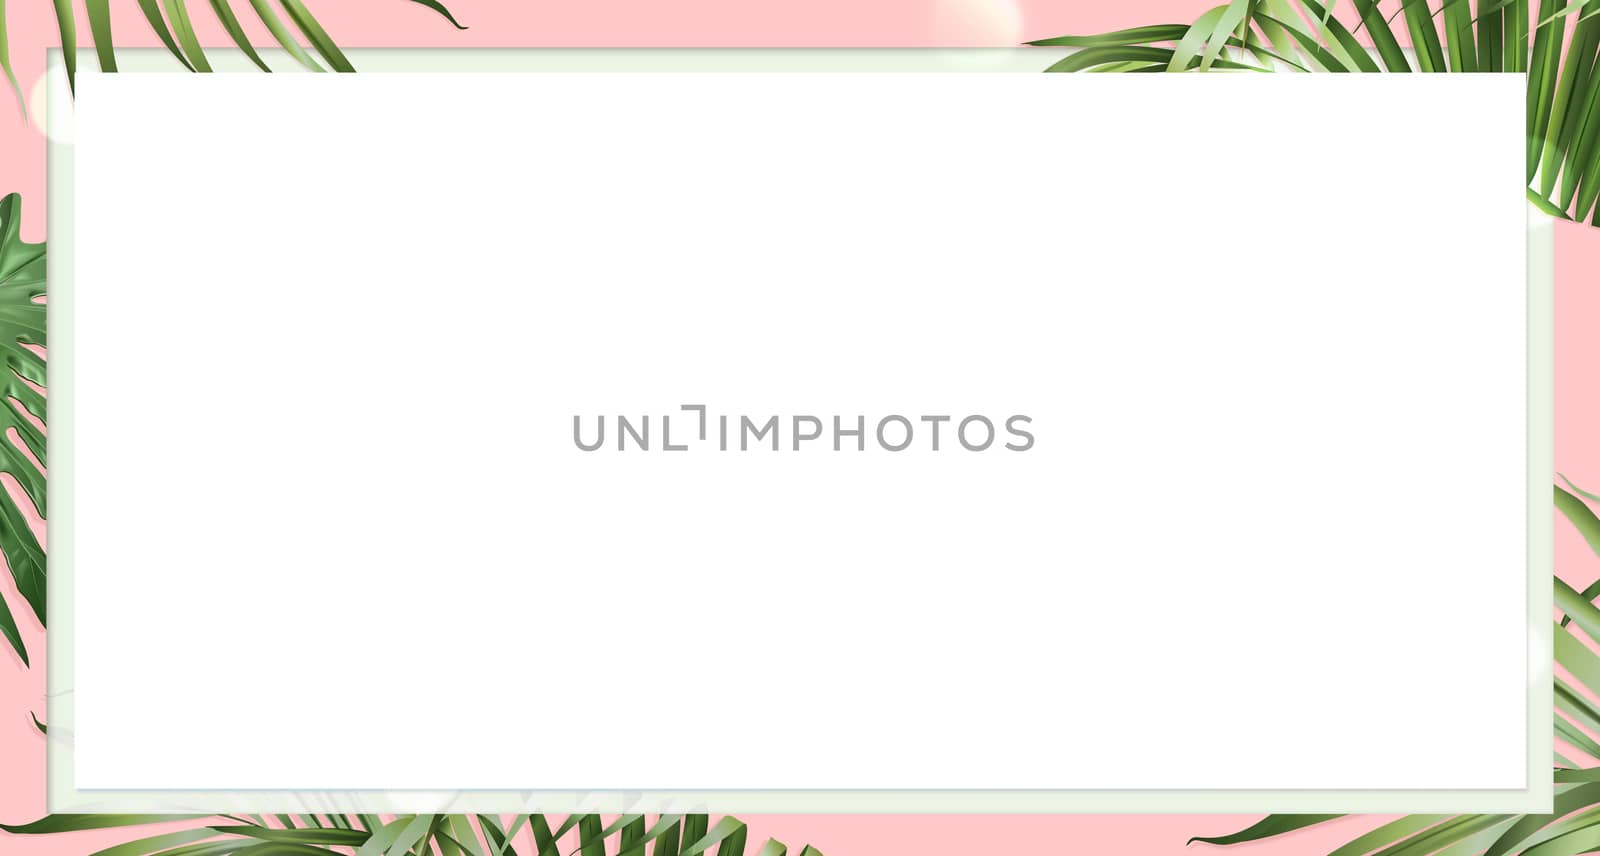 The website banner with pink background, euclidean and palm leaves border by cougarsan